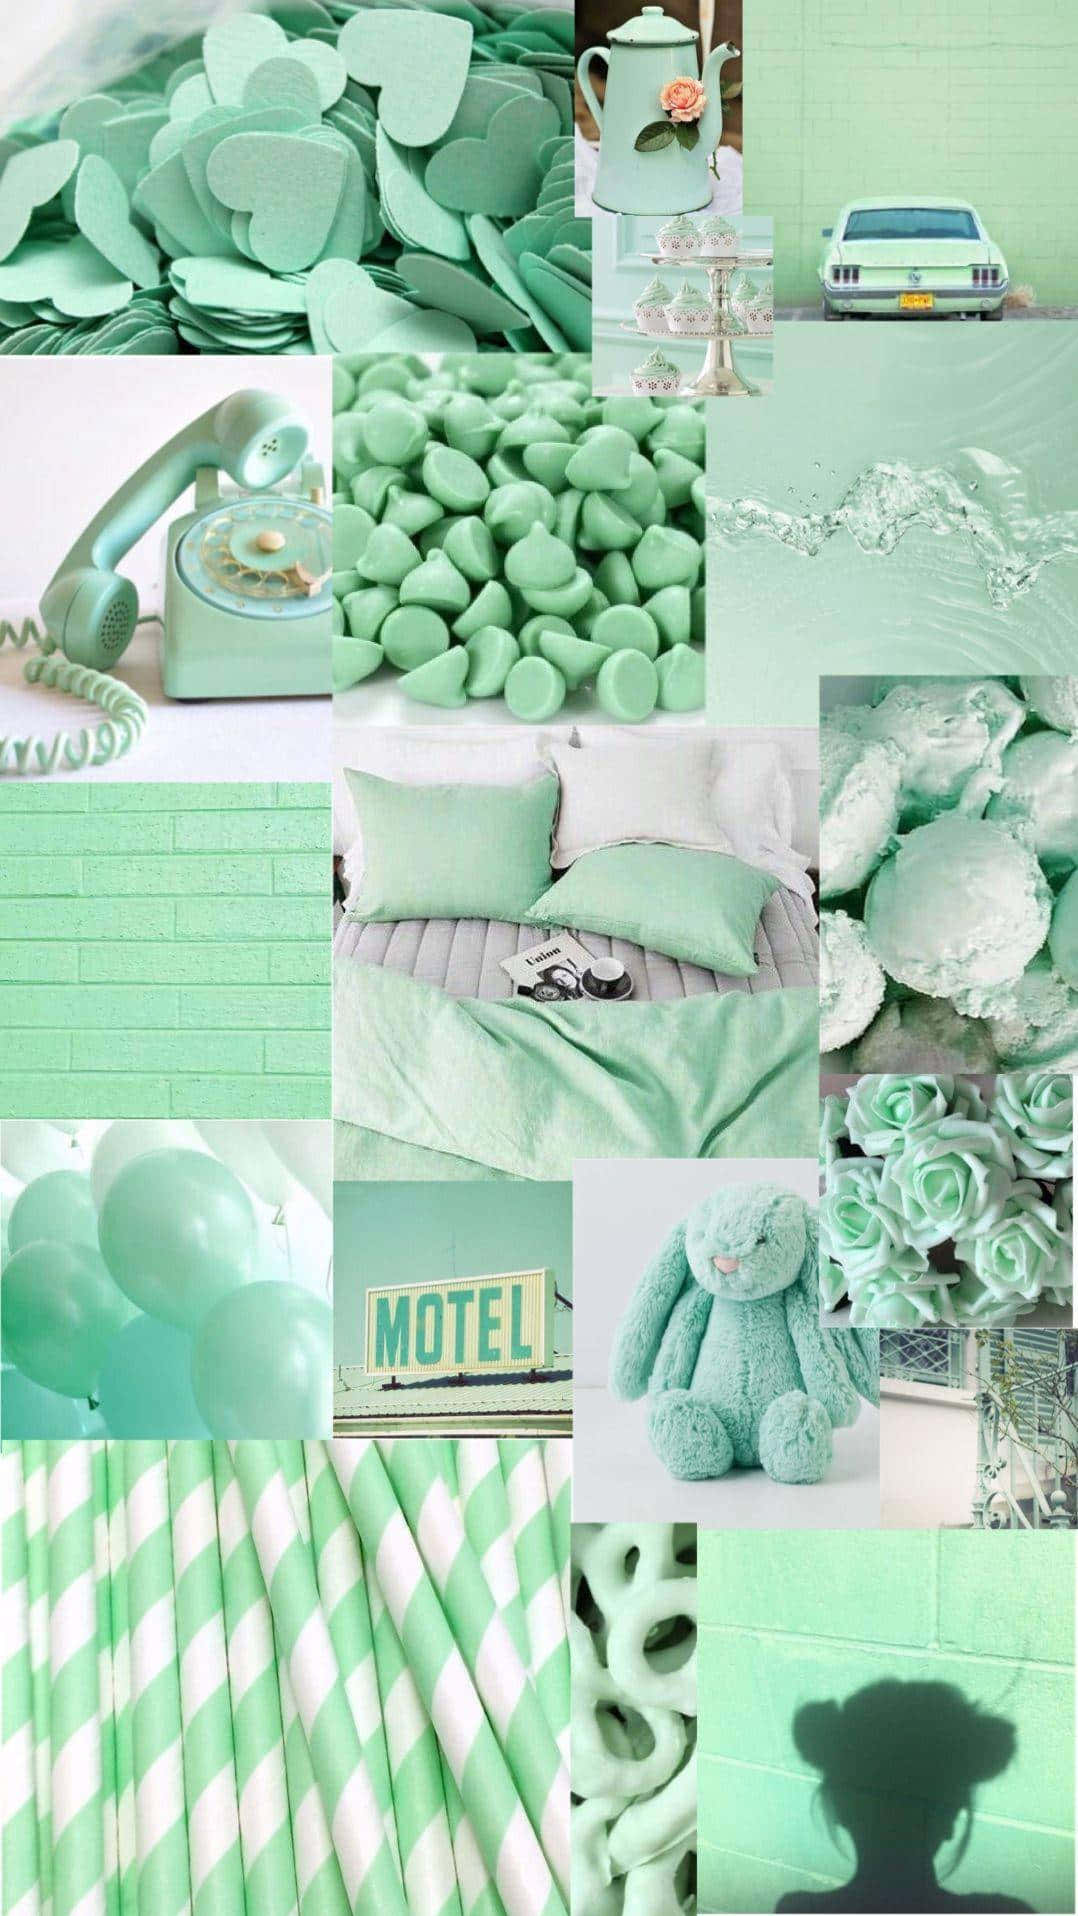 Get lost in a dreamy world with this cute mint green aesthetic! Wallpaper